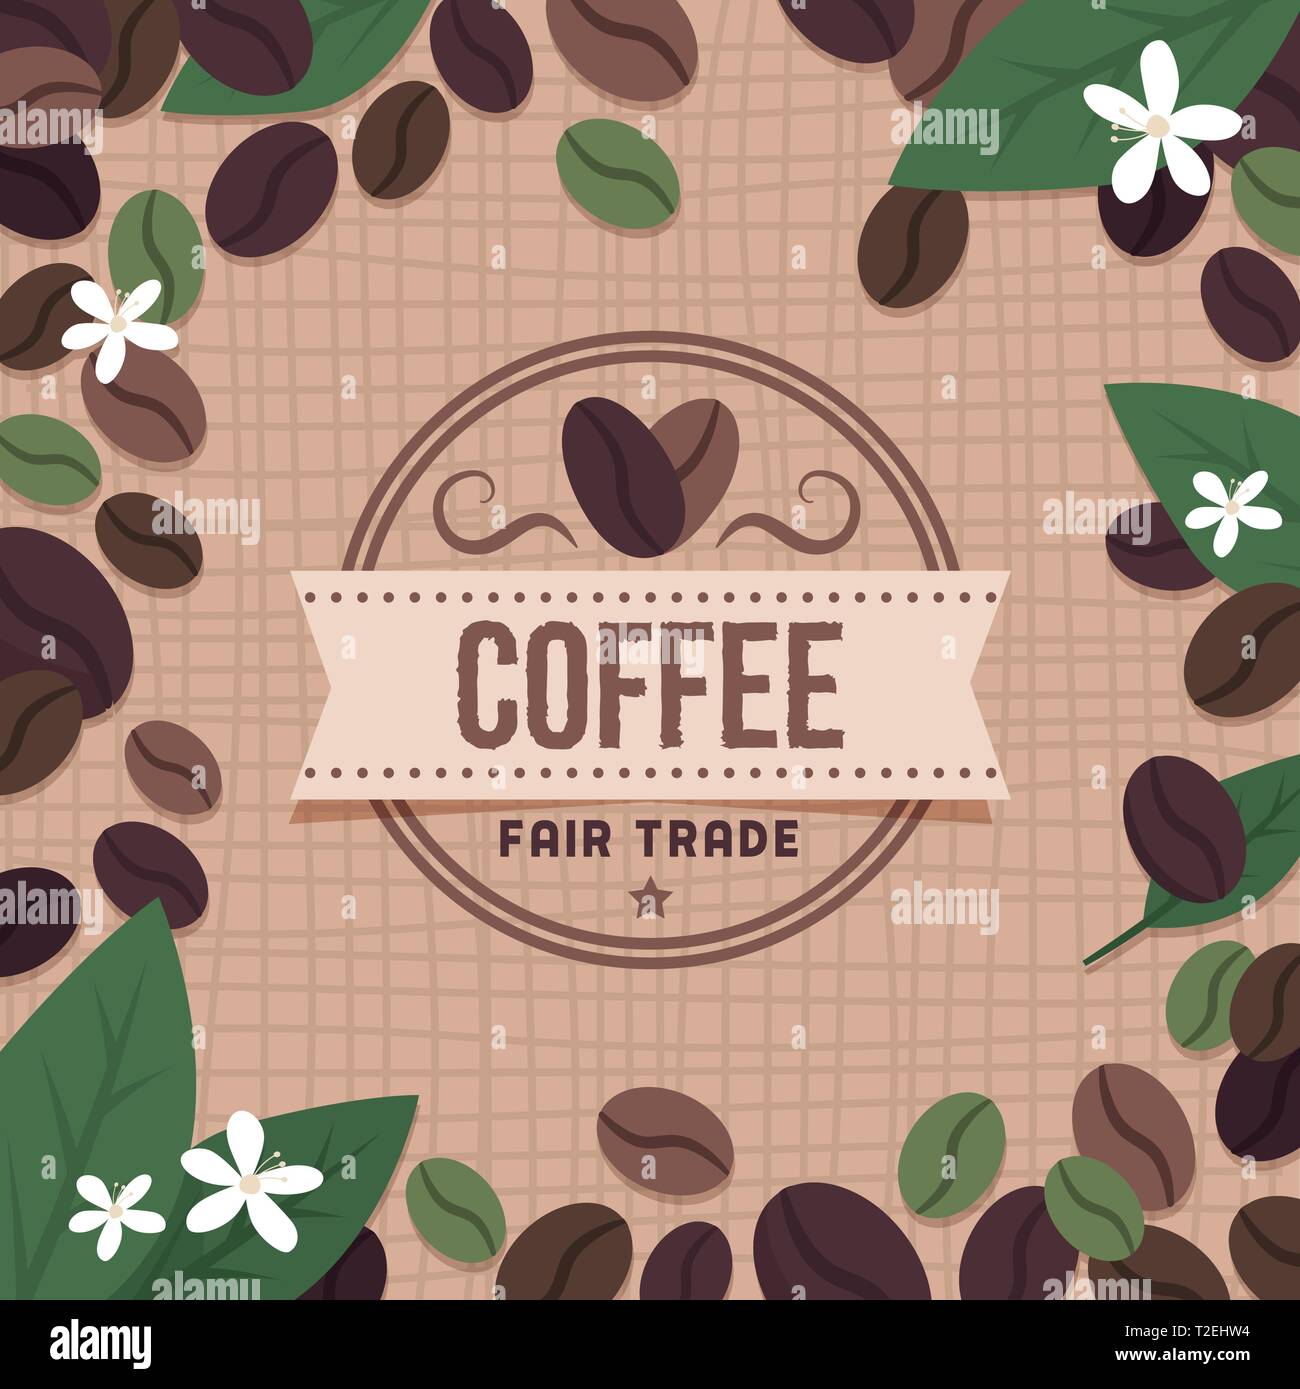 Fair trade coffee brand with coffee beans and flowers Stock Vector